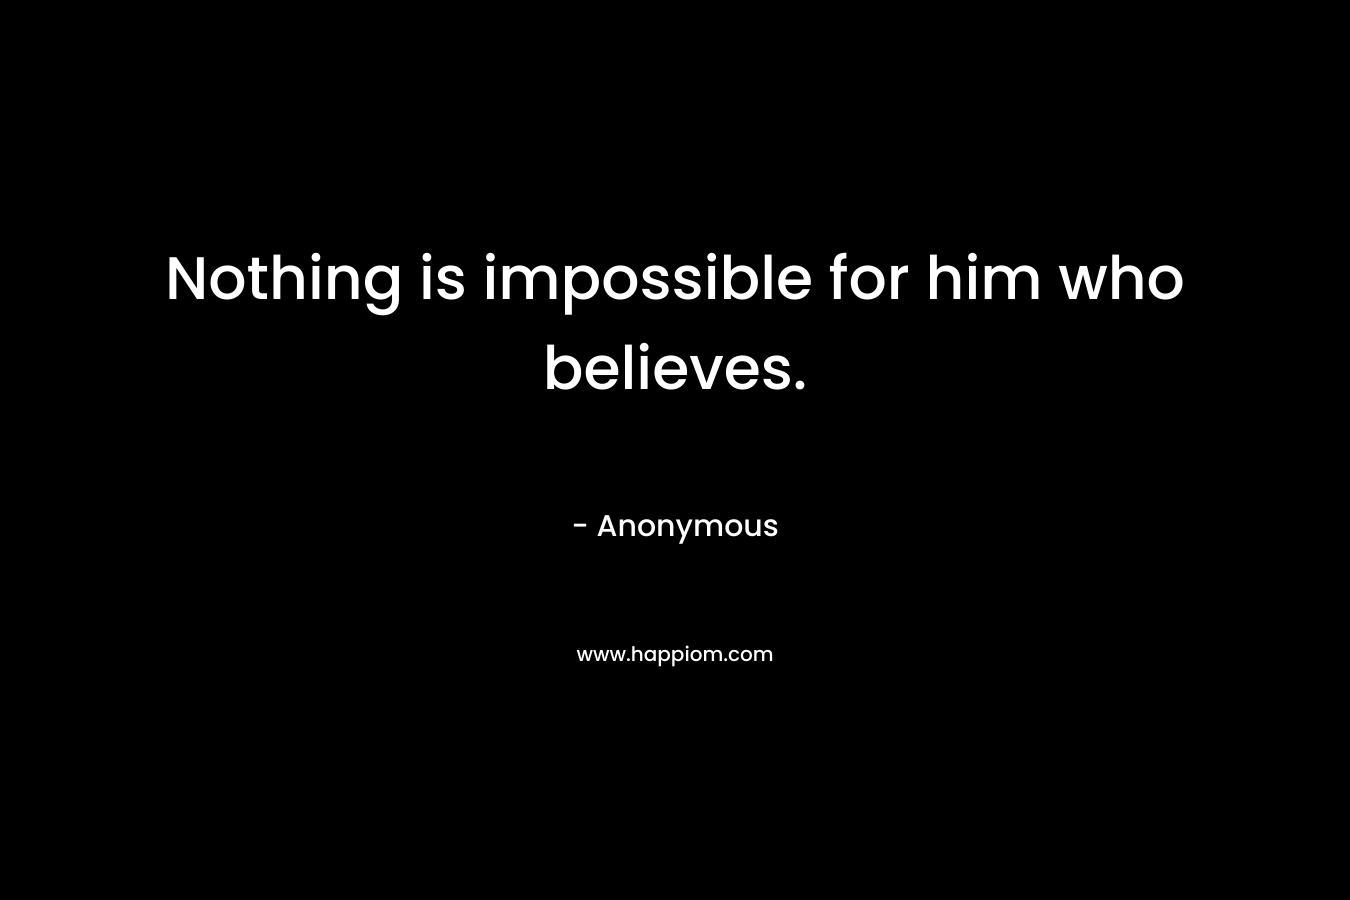 Nothing is impossible for him who believes.